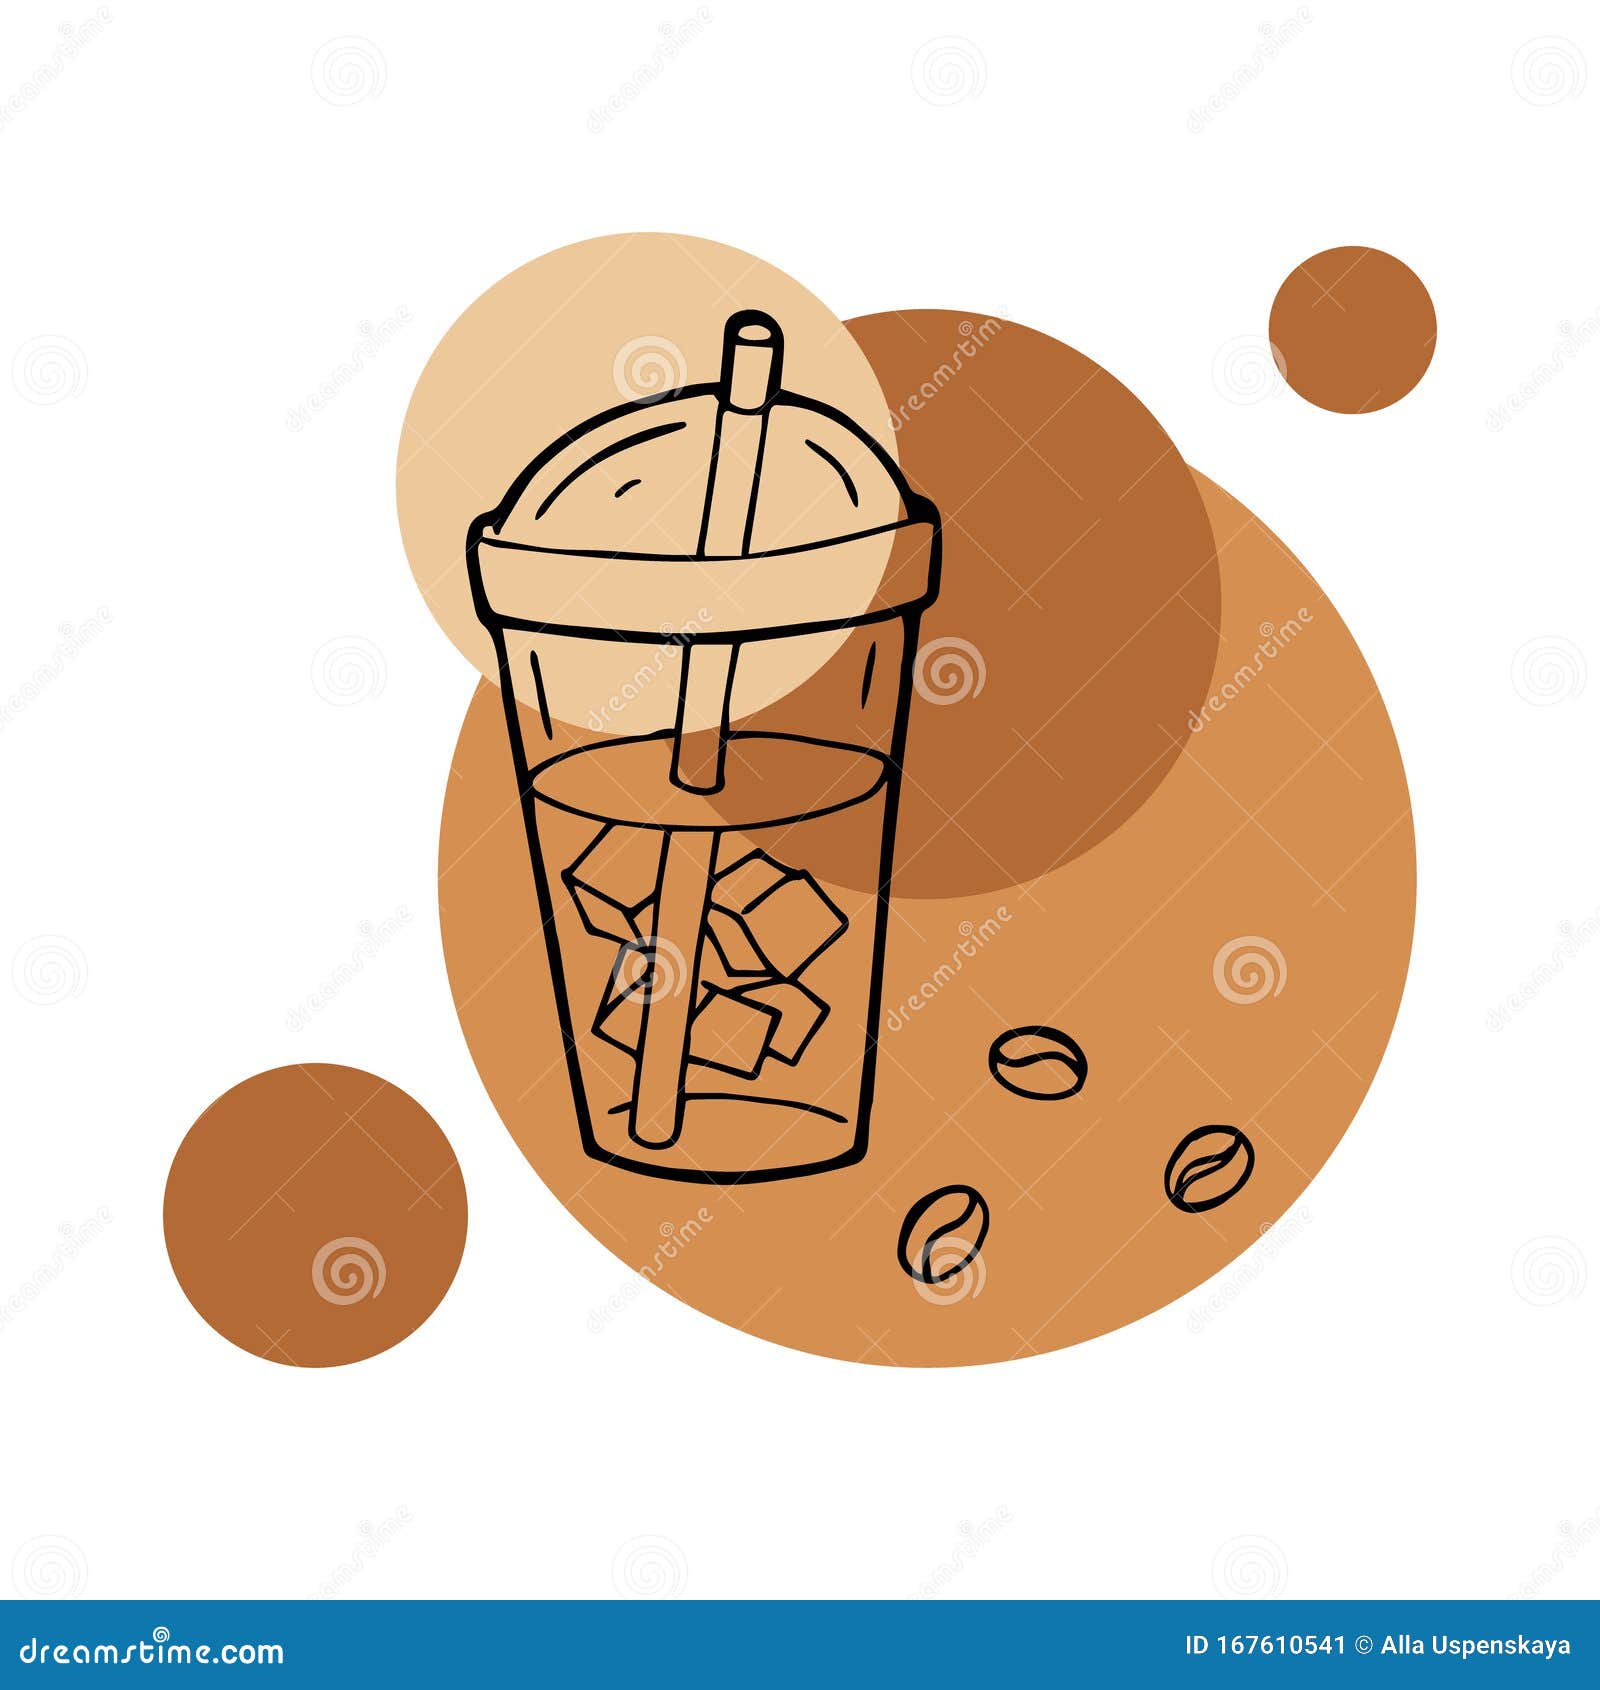 https://thumbs.dreamstime.com/z/hand-drawn-layout-logo-iced-coffee-takeaway-cup-doodle-style-black-outline-round-caramel-color-background-cute-hand-167610541.jpg